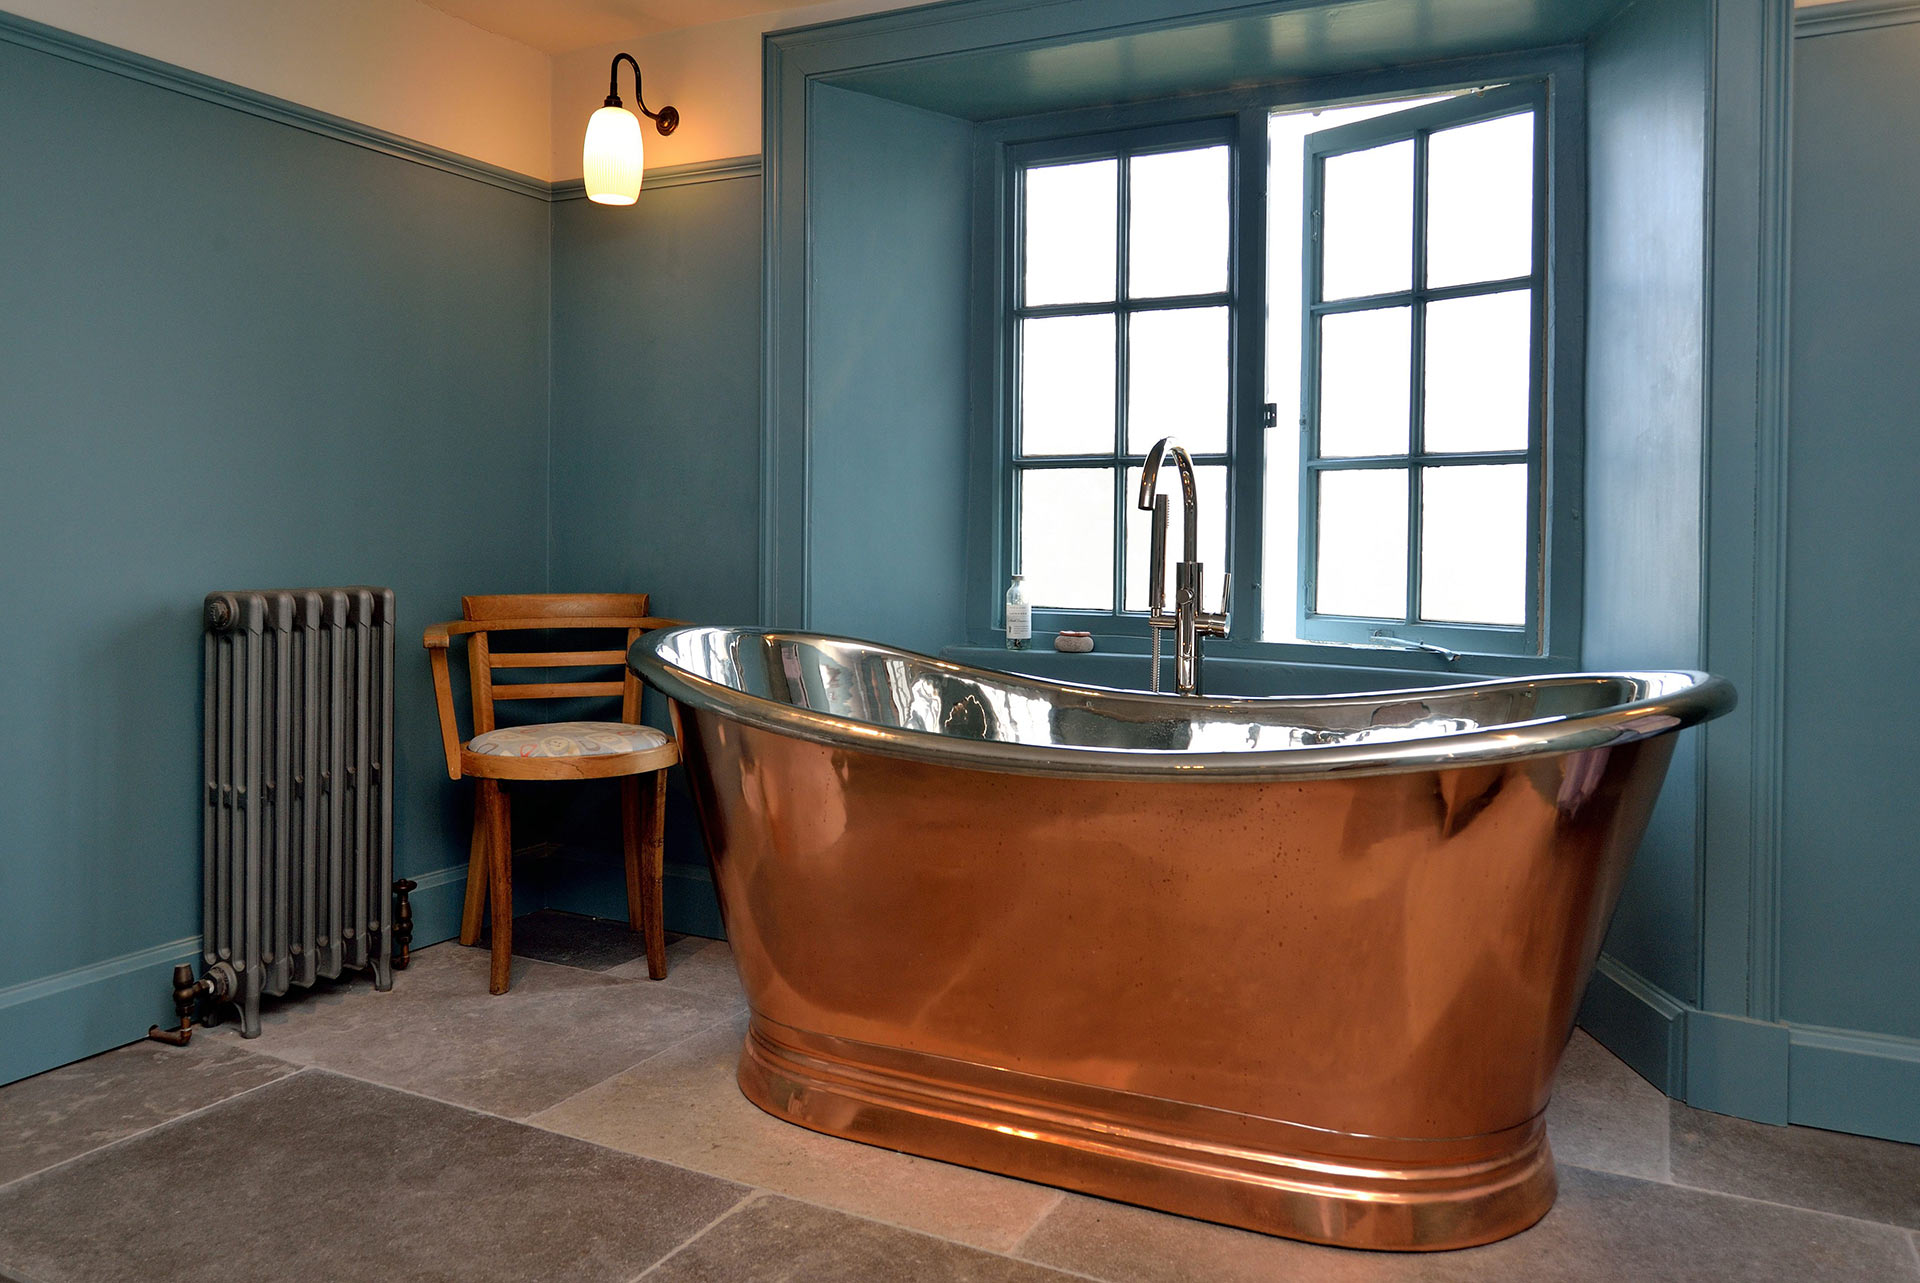 large freestanding copper bath in front of window